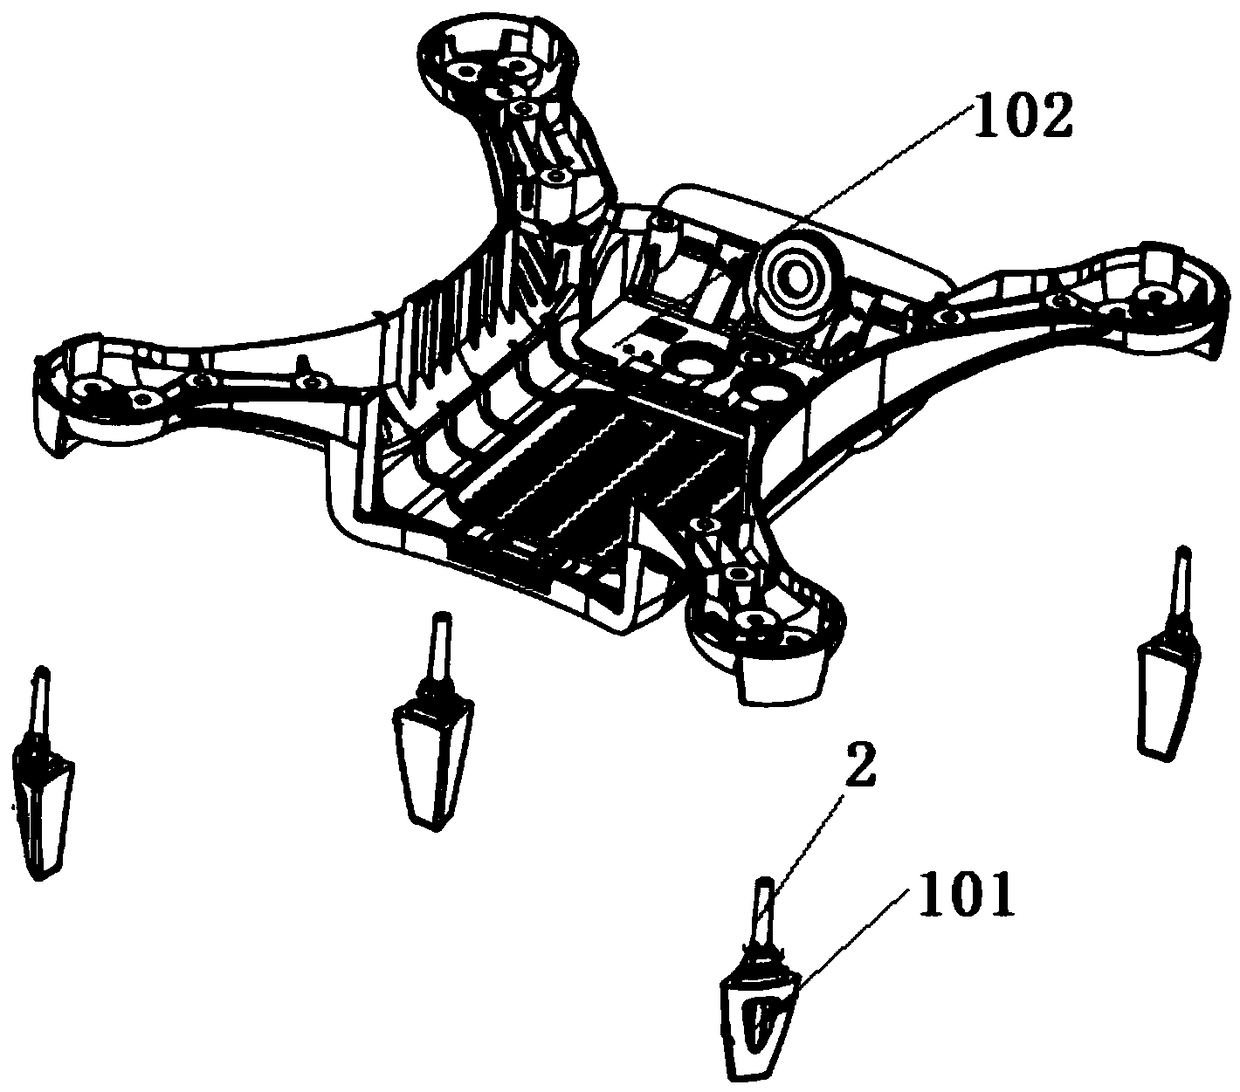 Unmanned aerial vehicle with buffering function